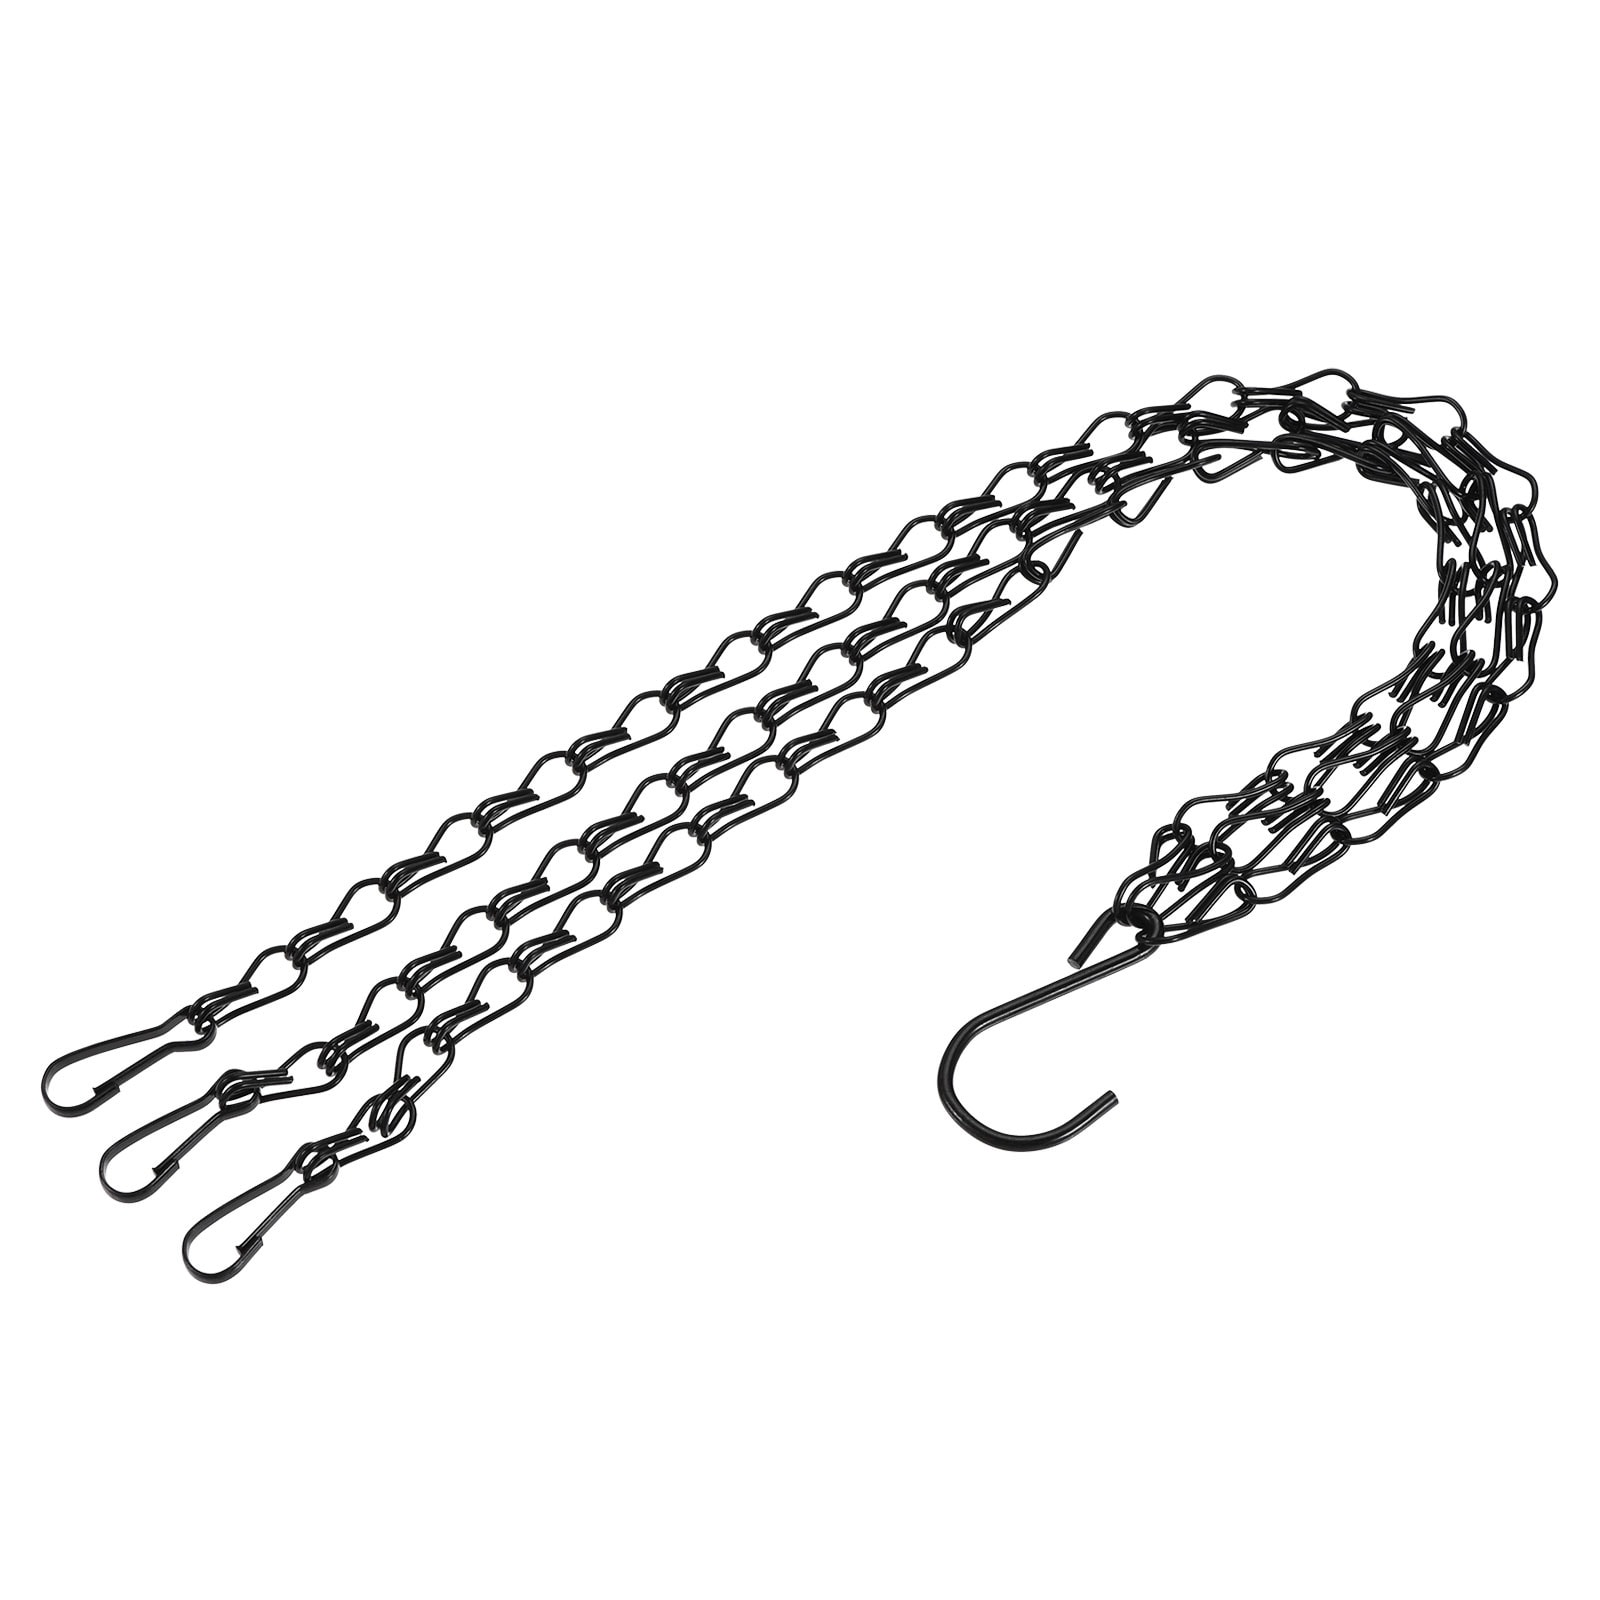 Hanging Chains 41cm Extension Link 3 Point Holder w S Hook Clips